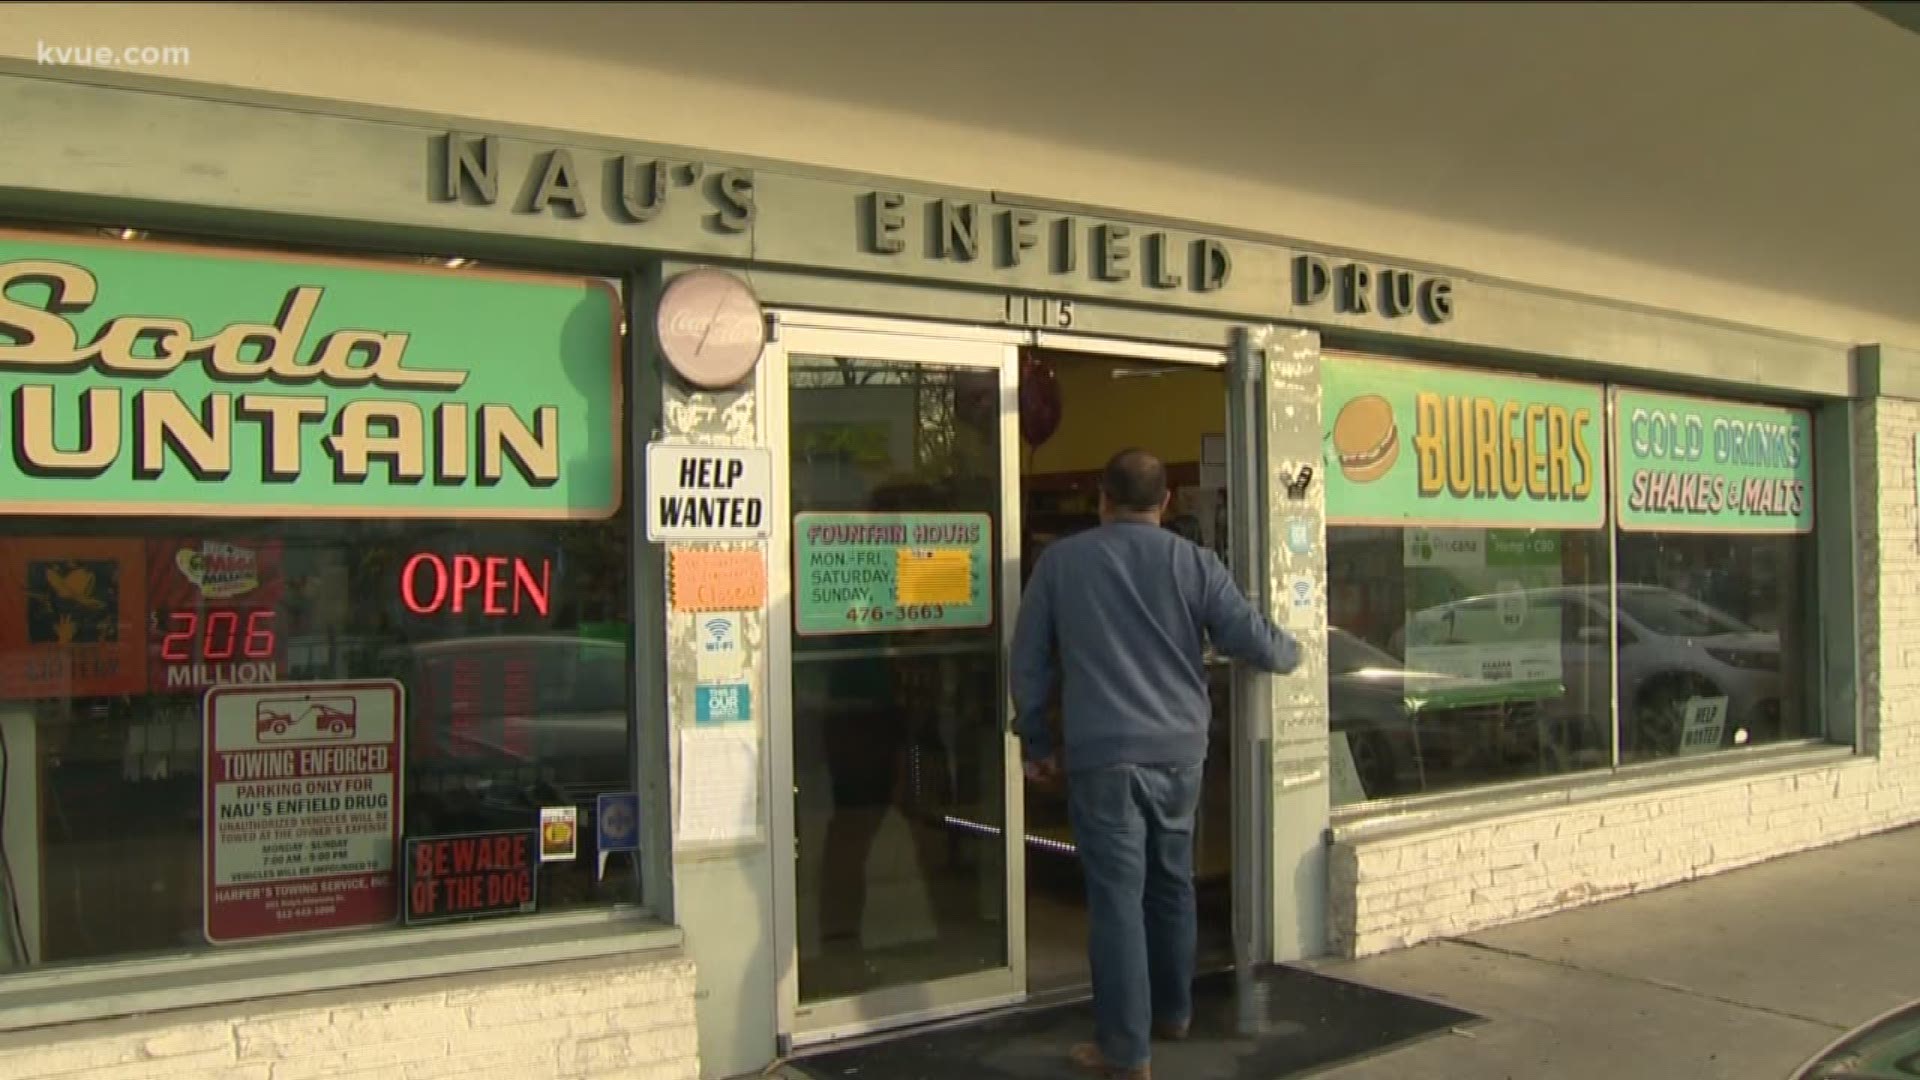 A local drug store had to temporarily shut down its soda shop as it tries to find more staff to keep it running.